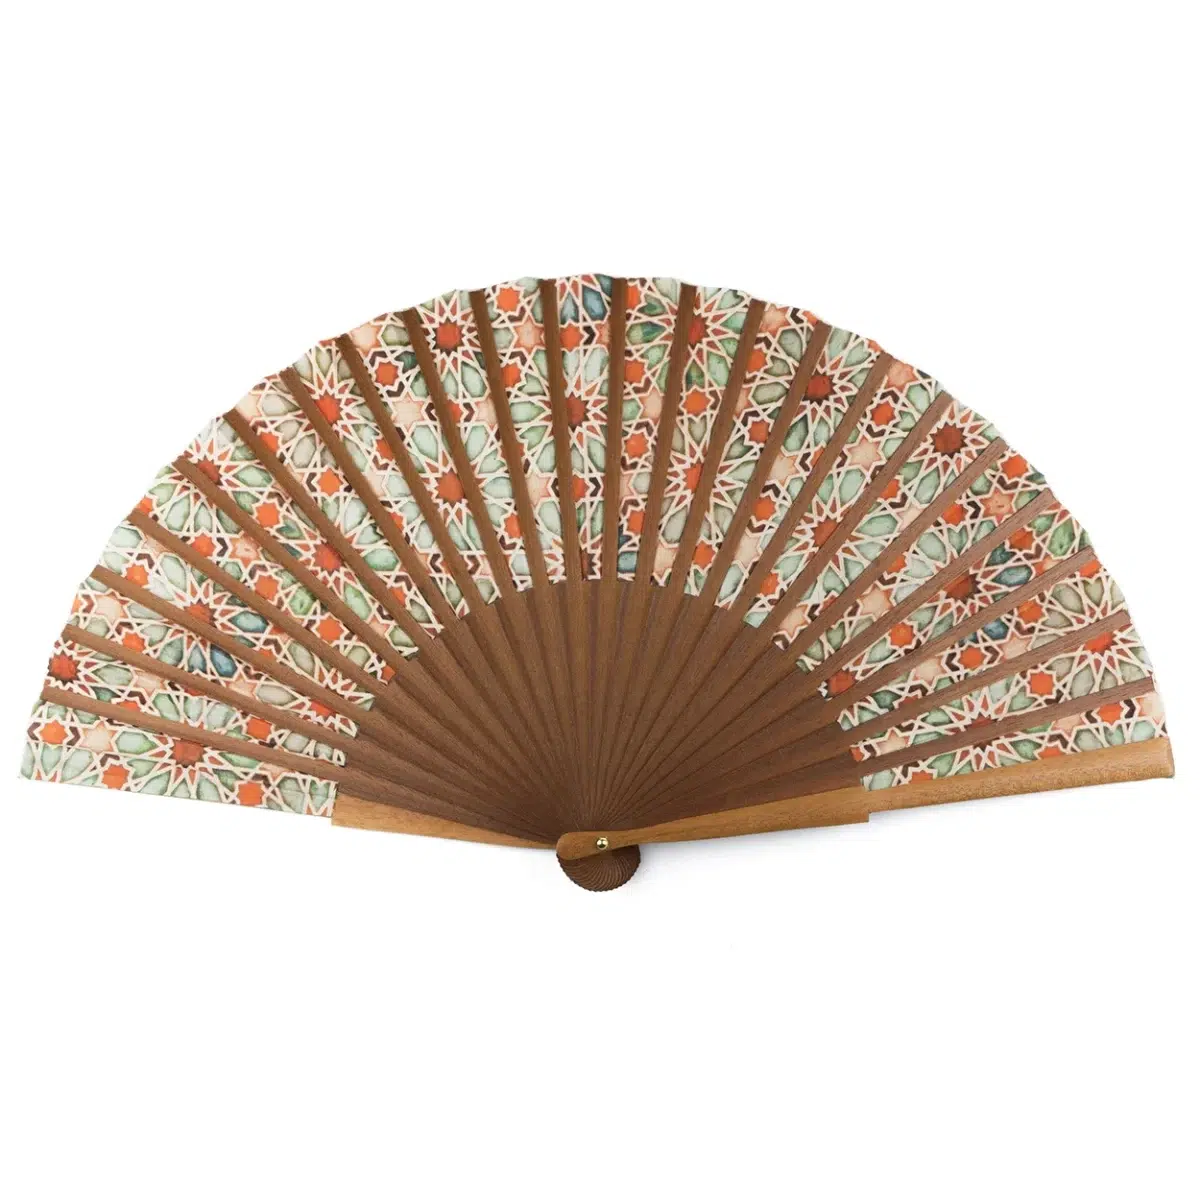 Natural Silk and Wood Fan with Orange Print Inspired by the Latticework of Al-Andalus.